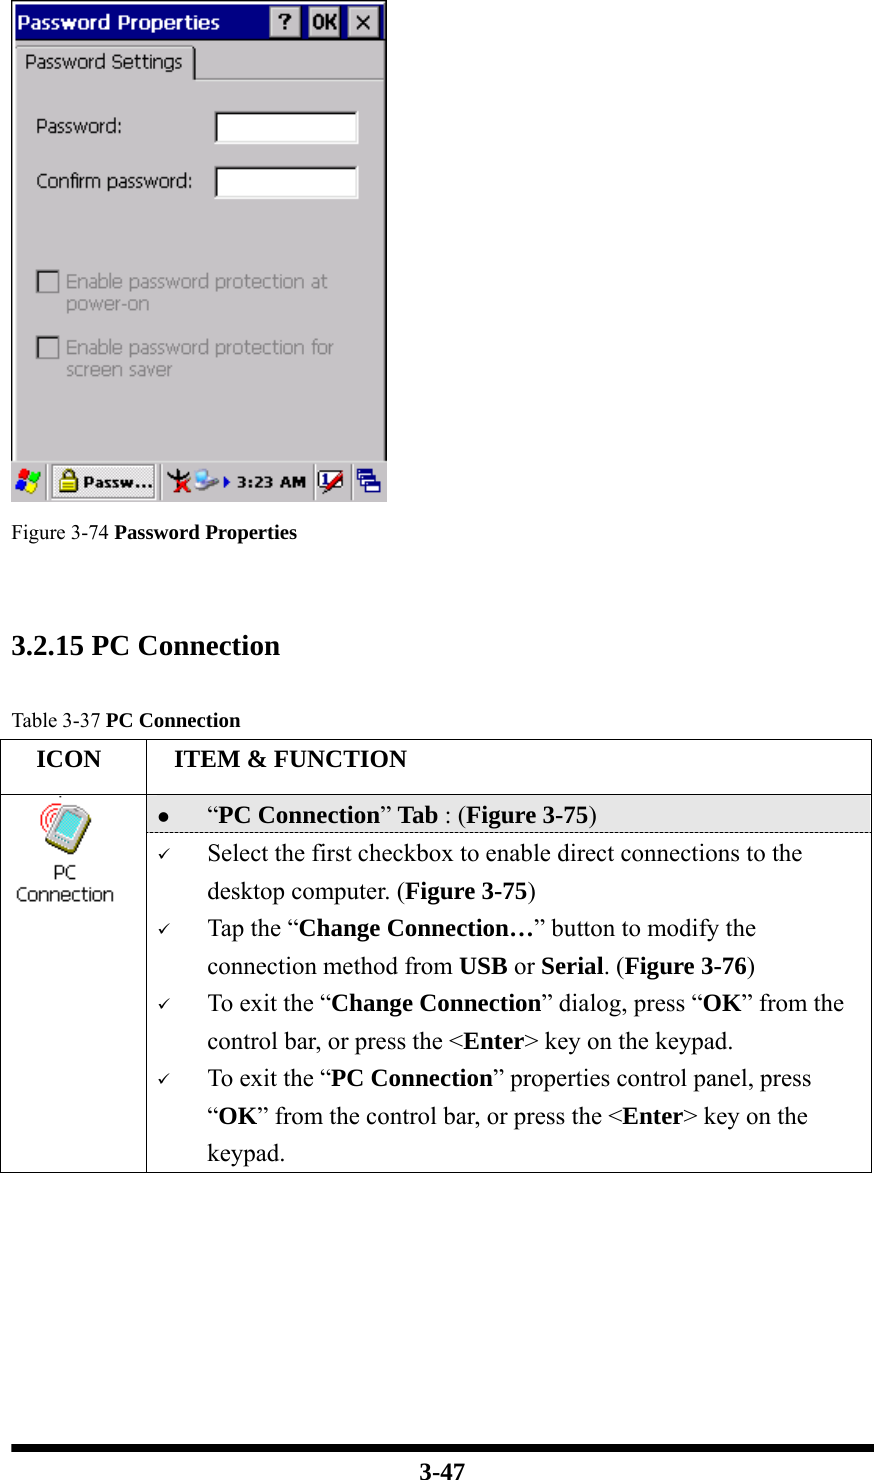  3-47    Figure 3-74 Password Properties   3.2.15 PC Connection   Table 3-37 PC Connection   ICON   ITEM &amp; FUNCTION z “PC Connection” Tab : (Figure 3-75)  9 Select the first checkbox to enable direct connections to the desktop computer. (Figure 3-75) 9 Tap the “Change Connection…” button to modify the connection method from USB or Serial. (Figure 3-76) 9 To exit the “Change Connection” dialog, press “OK” from the control bar, or press the &lt;Enter&gt; key on the keypad. 9 To exit the “PC Connection” properties control panel, press “OK” from the control bar, or press the &lt;Enter&gt; key on the keypad.  